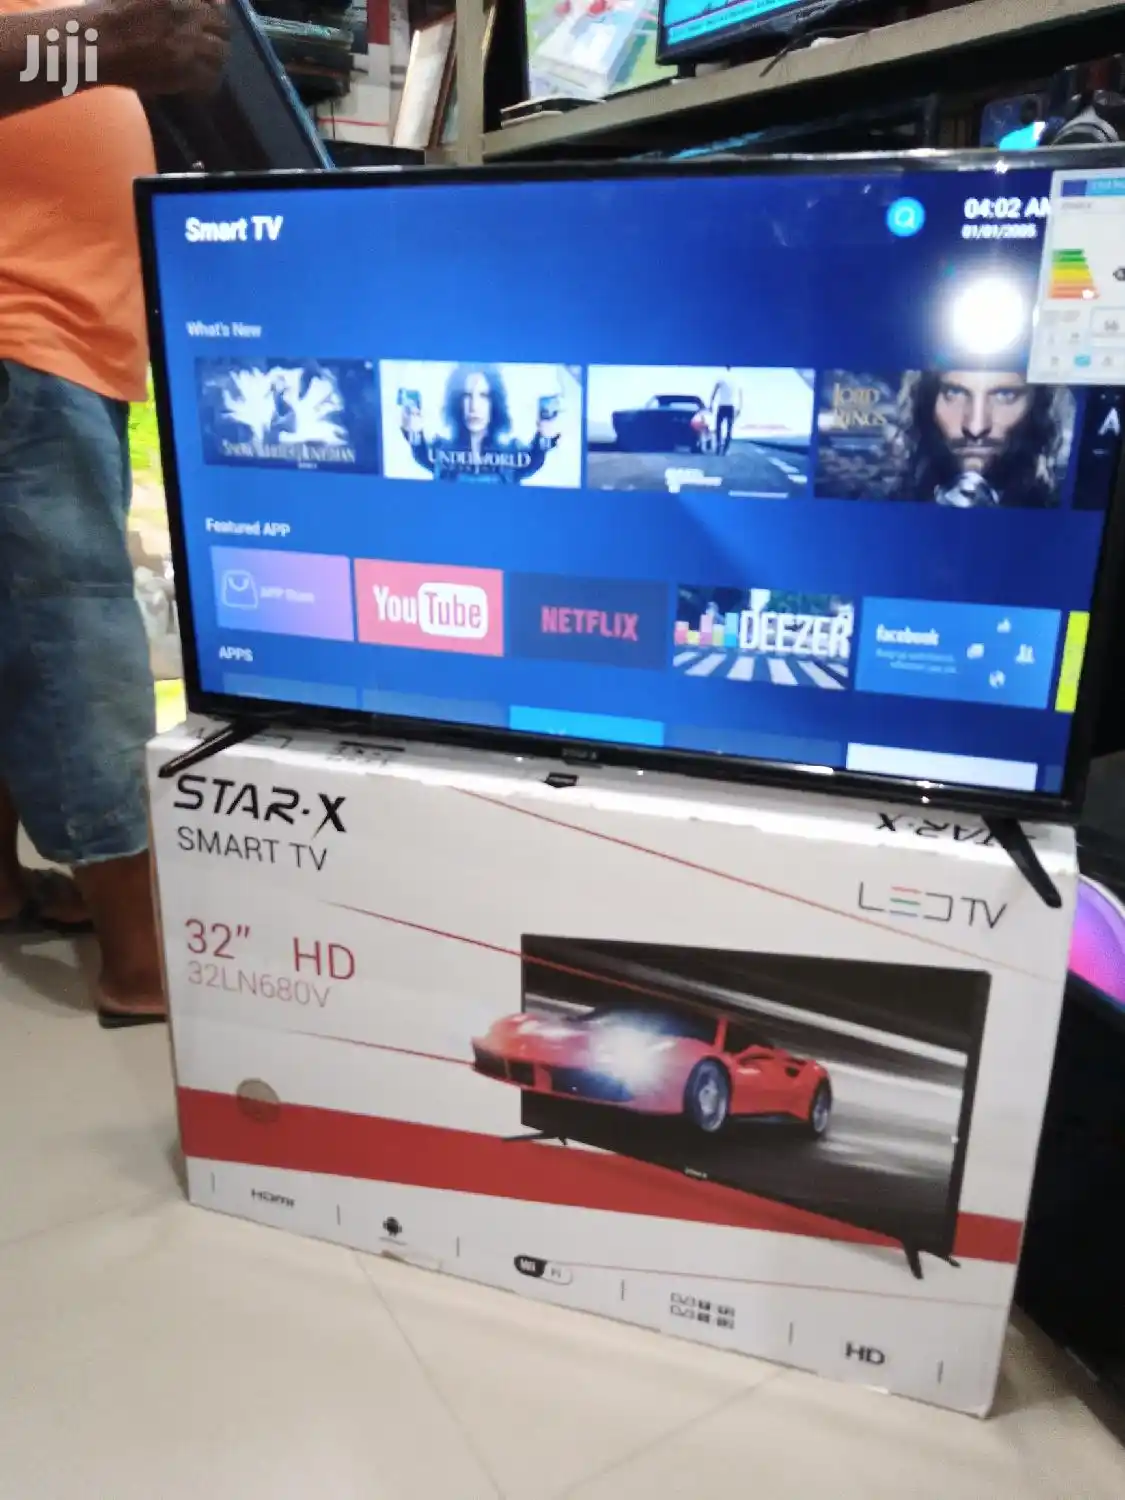 Brand. Starx. Smart Tv Hdmi Usb Youtube Netflix Tv Resolution. Full Hd (1080P / 1920×1080) Cinema 3D. No. Number Of Hdmi Ports. … Curved Tv. No. Display Size (Inches)